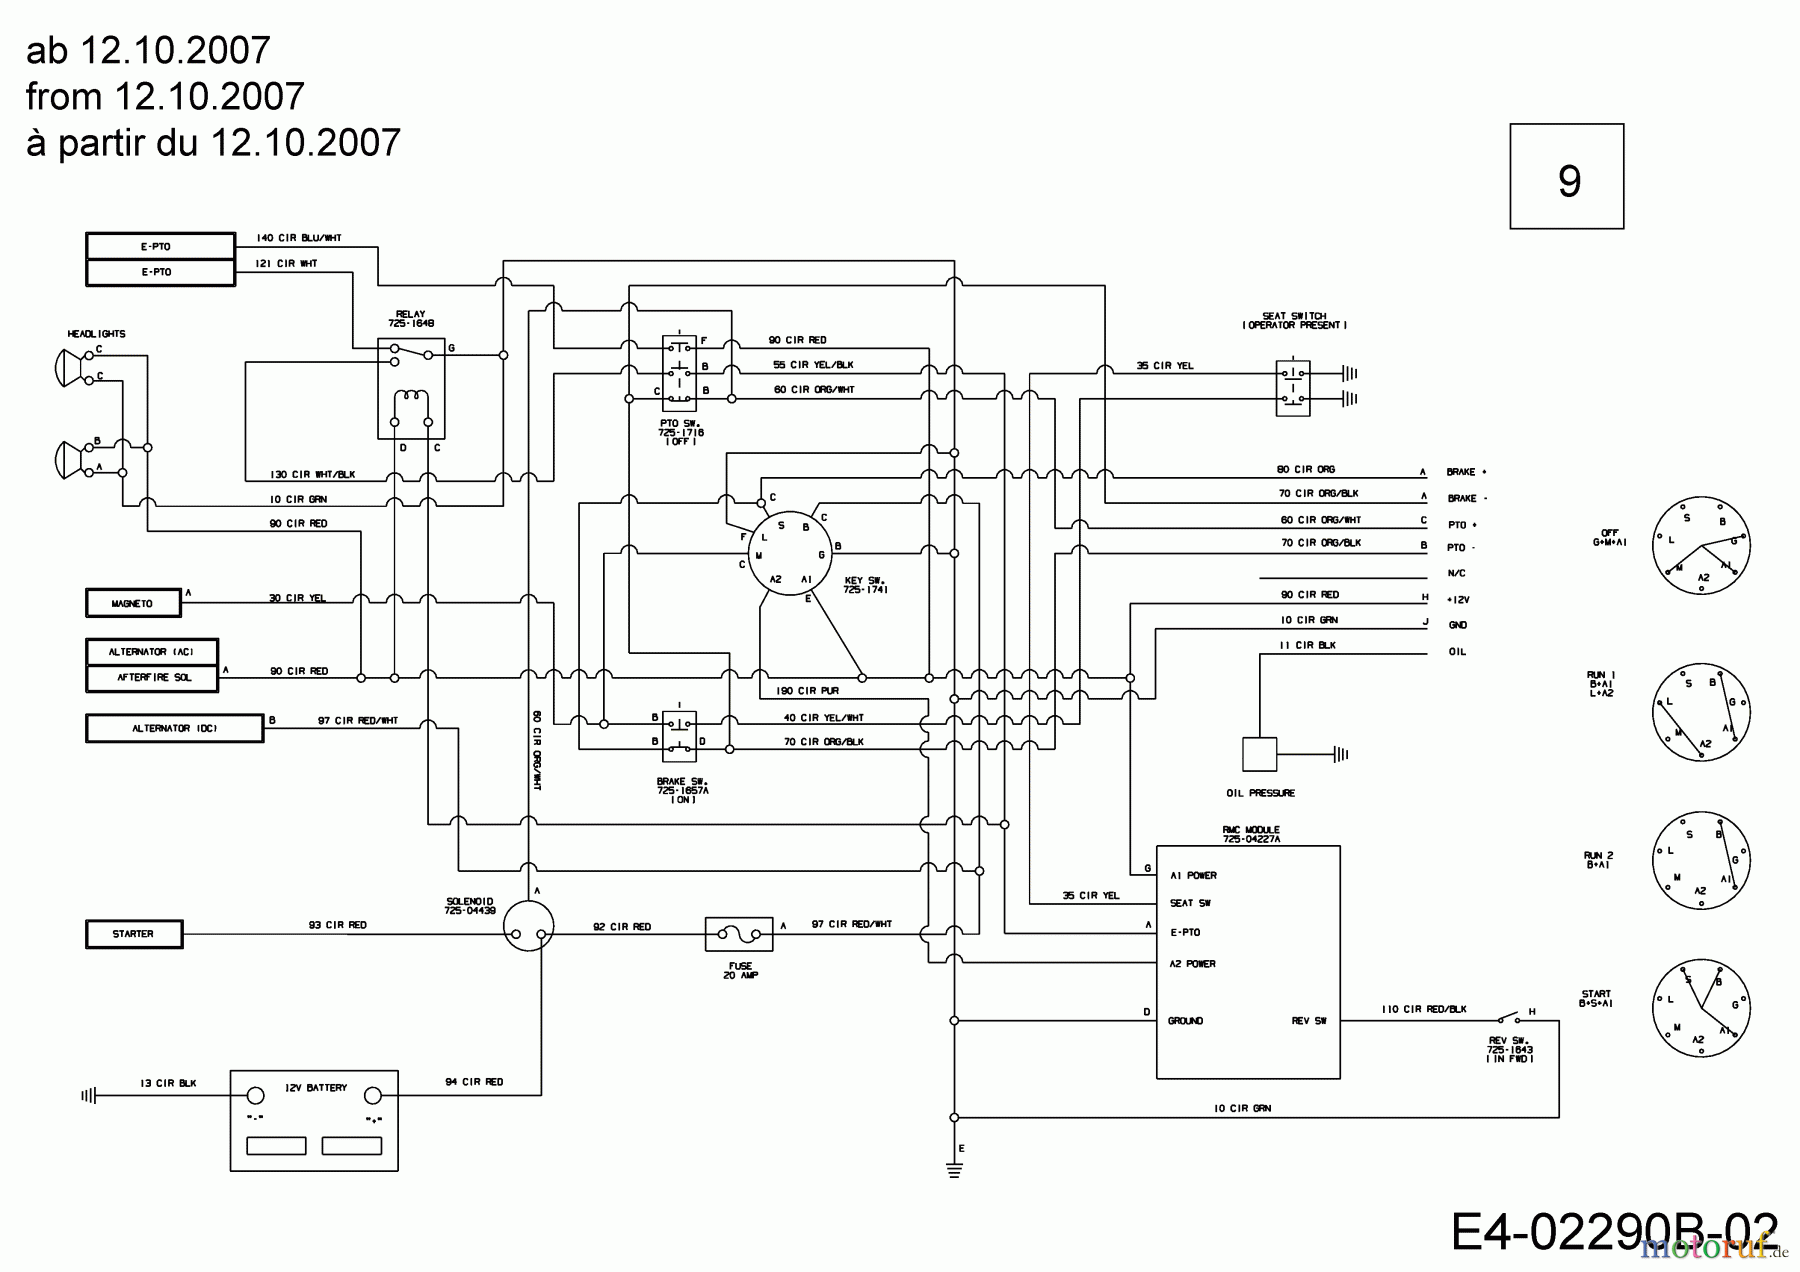  Cub Cadet Garden tractors GT 1225 14AI13CP603  (2008) Wiring diagram from 11.10.2007